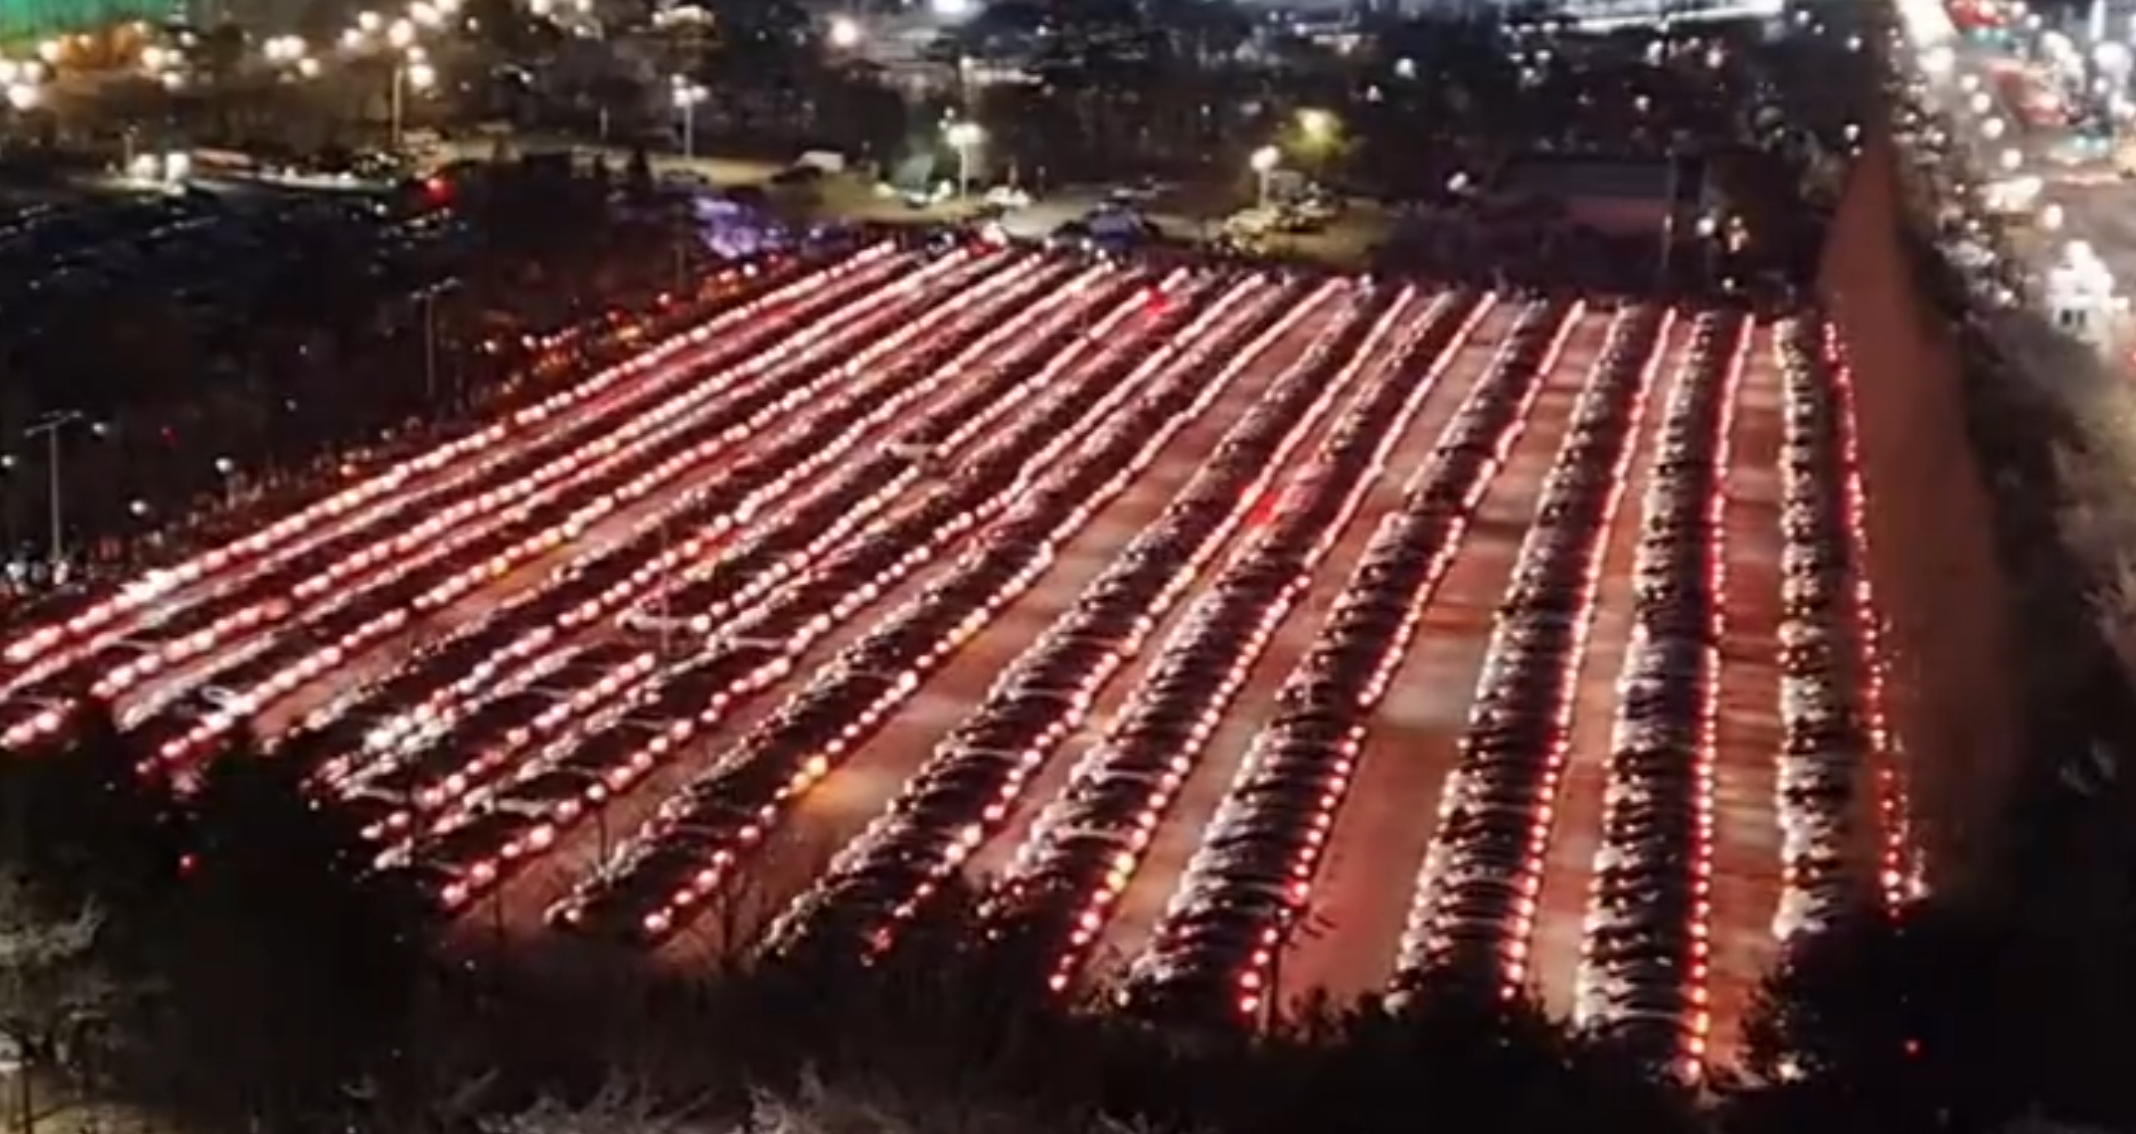 Over 1,000 Tesla owners host largest light show yet in South Korea